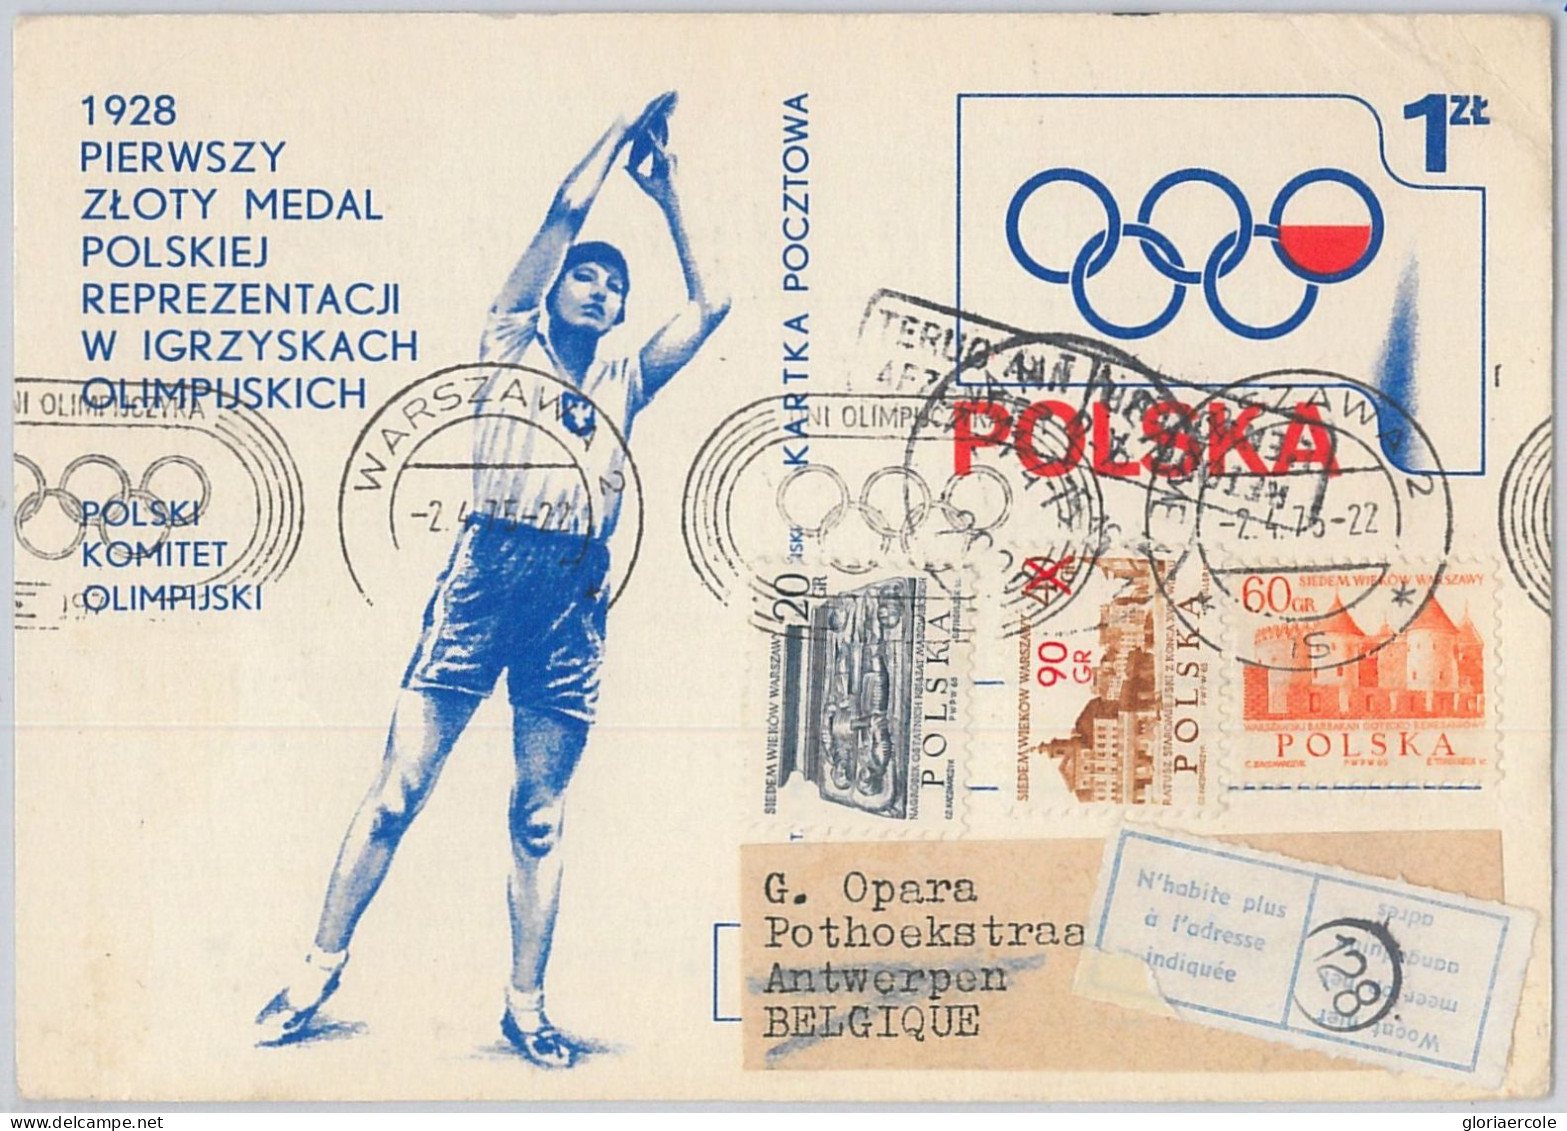 51131 - POLAND - POSTAL HISTORY -  STATIONERY 1978 OLYMPIC Games Disk Throwing - Ete 1928: Amsterdam